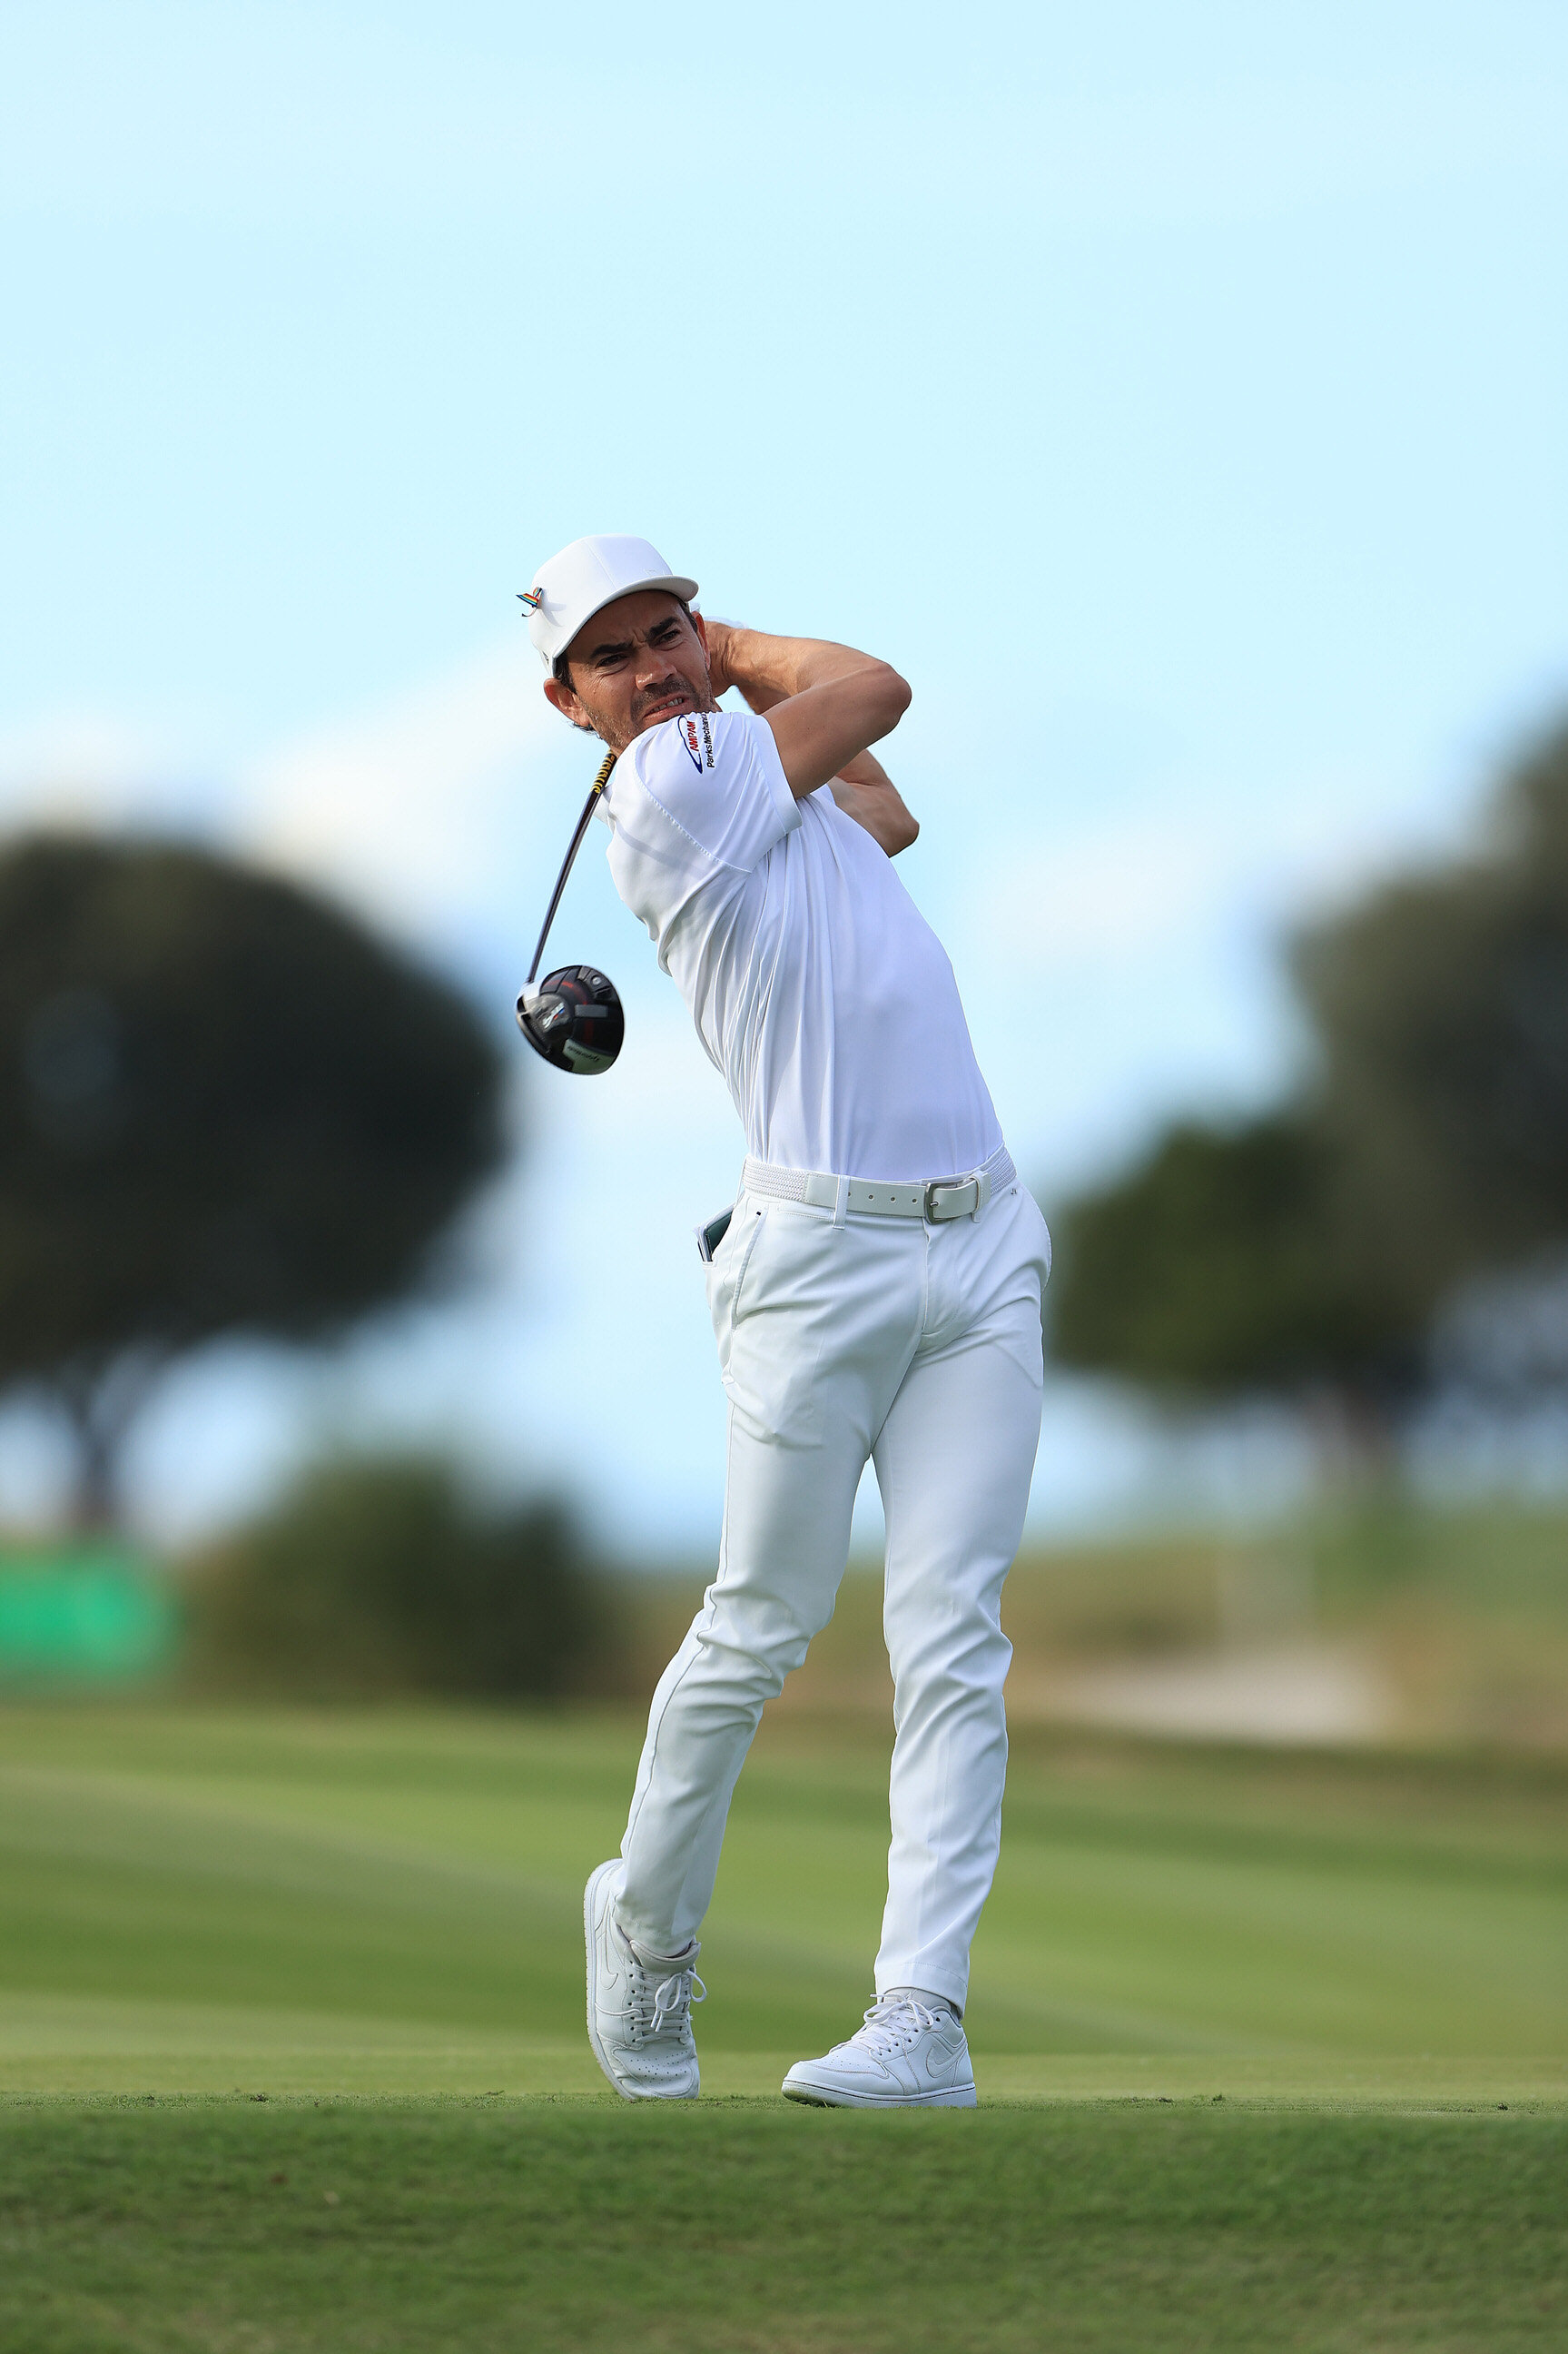  ST SIMONS ISLAND, GEORGIA - NOVEMBER 21:  (Swing Sequence 4-6) Camilo Villegas of Colombia plays his shot from the 16th tee during the third round of The RSM Classic at the Seaside Course at Sea Island Golf Club on November 21, 2020 in St Simons Isl